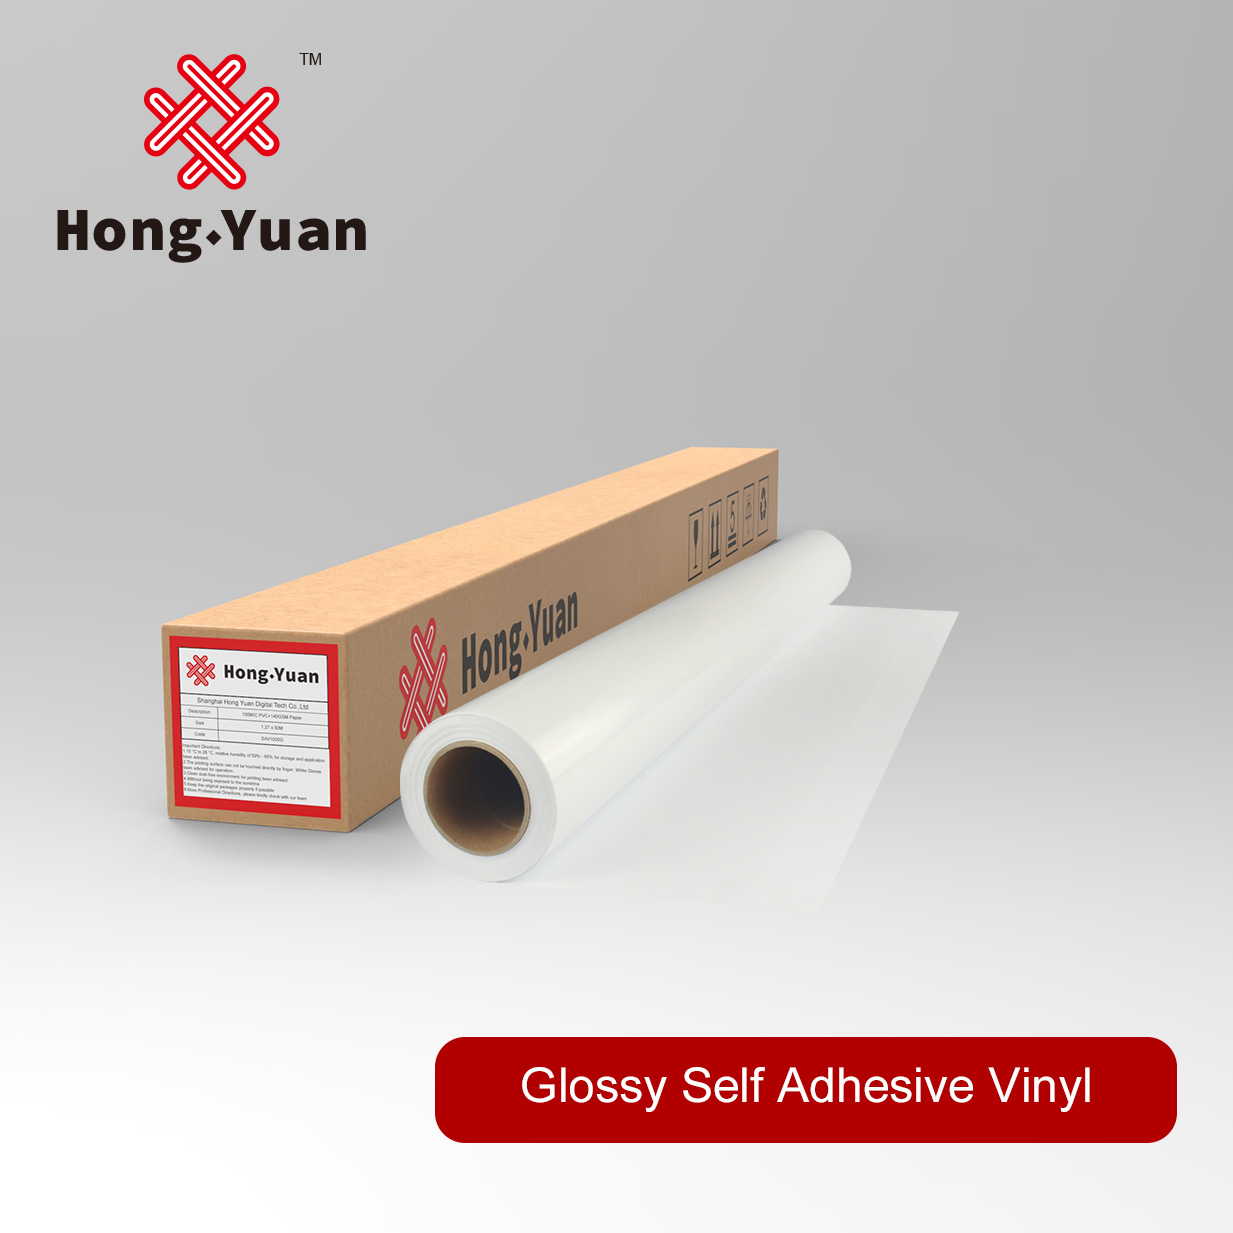 As a specialist for self-adhesive vinyl, IPC offers innovative and premium  products with the quality assurance of being Made in Taiwan.